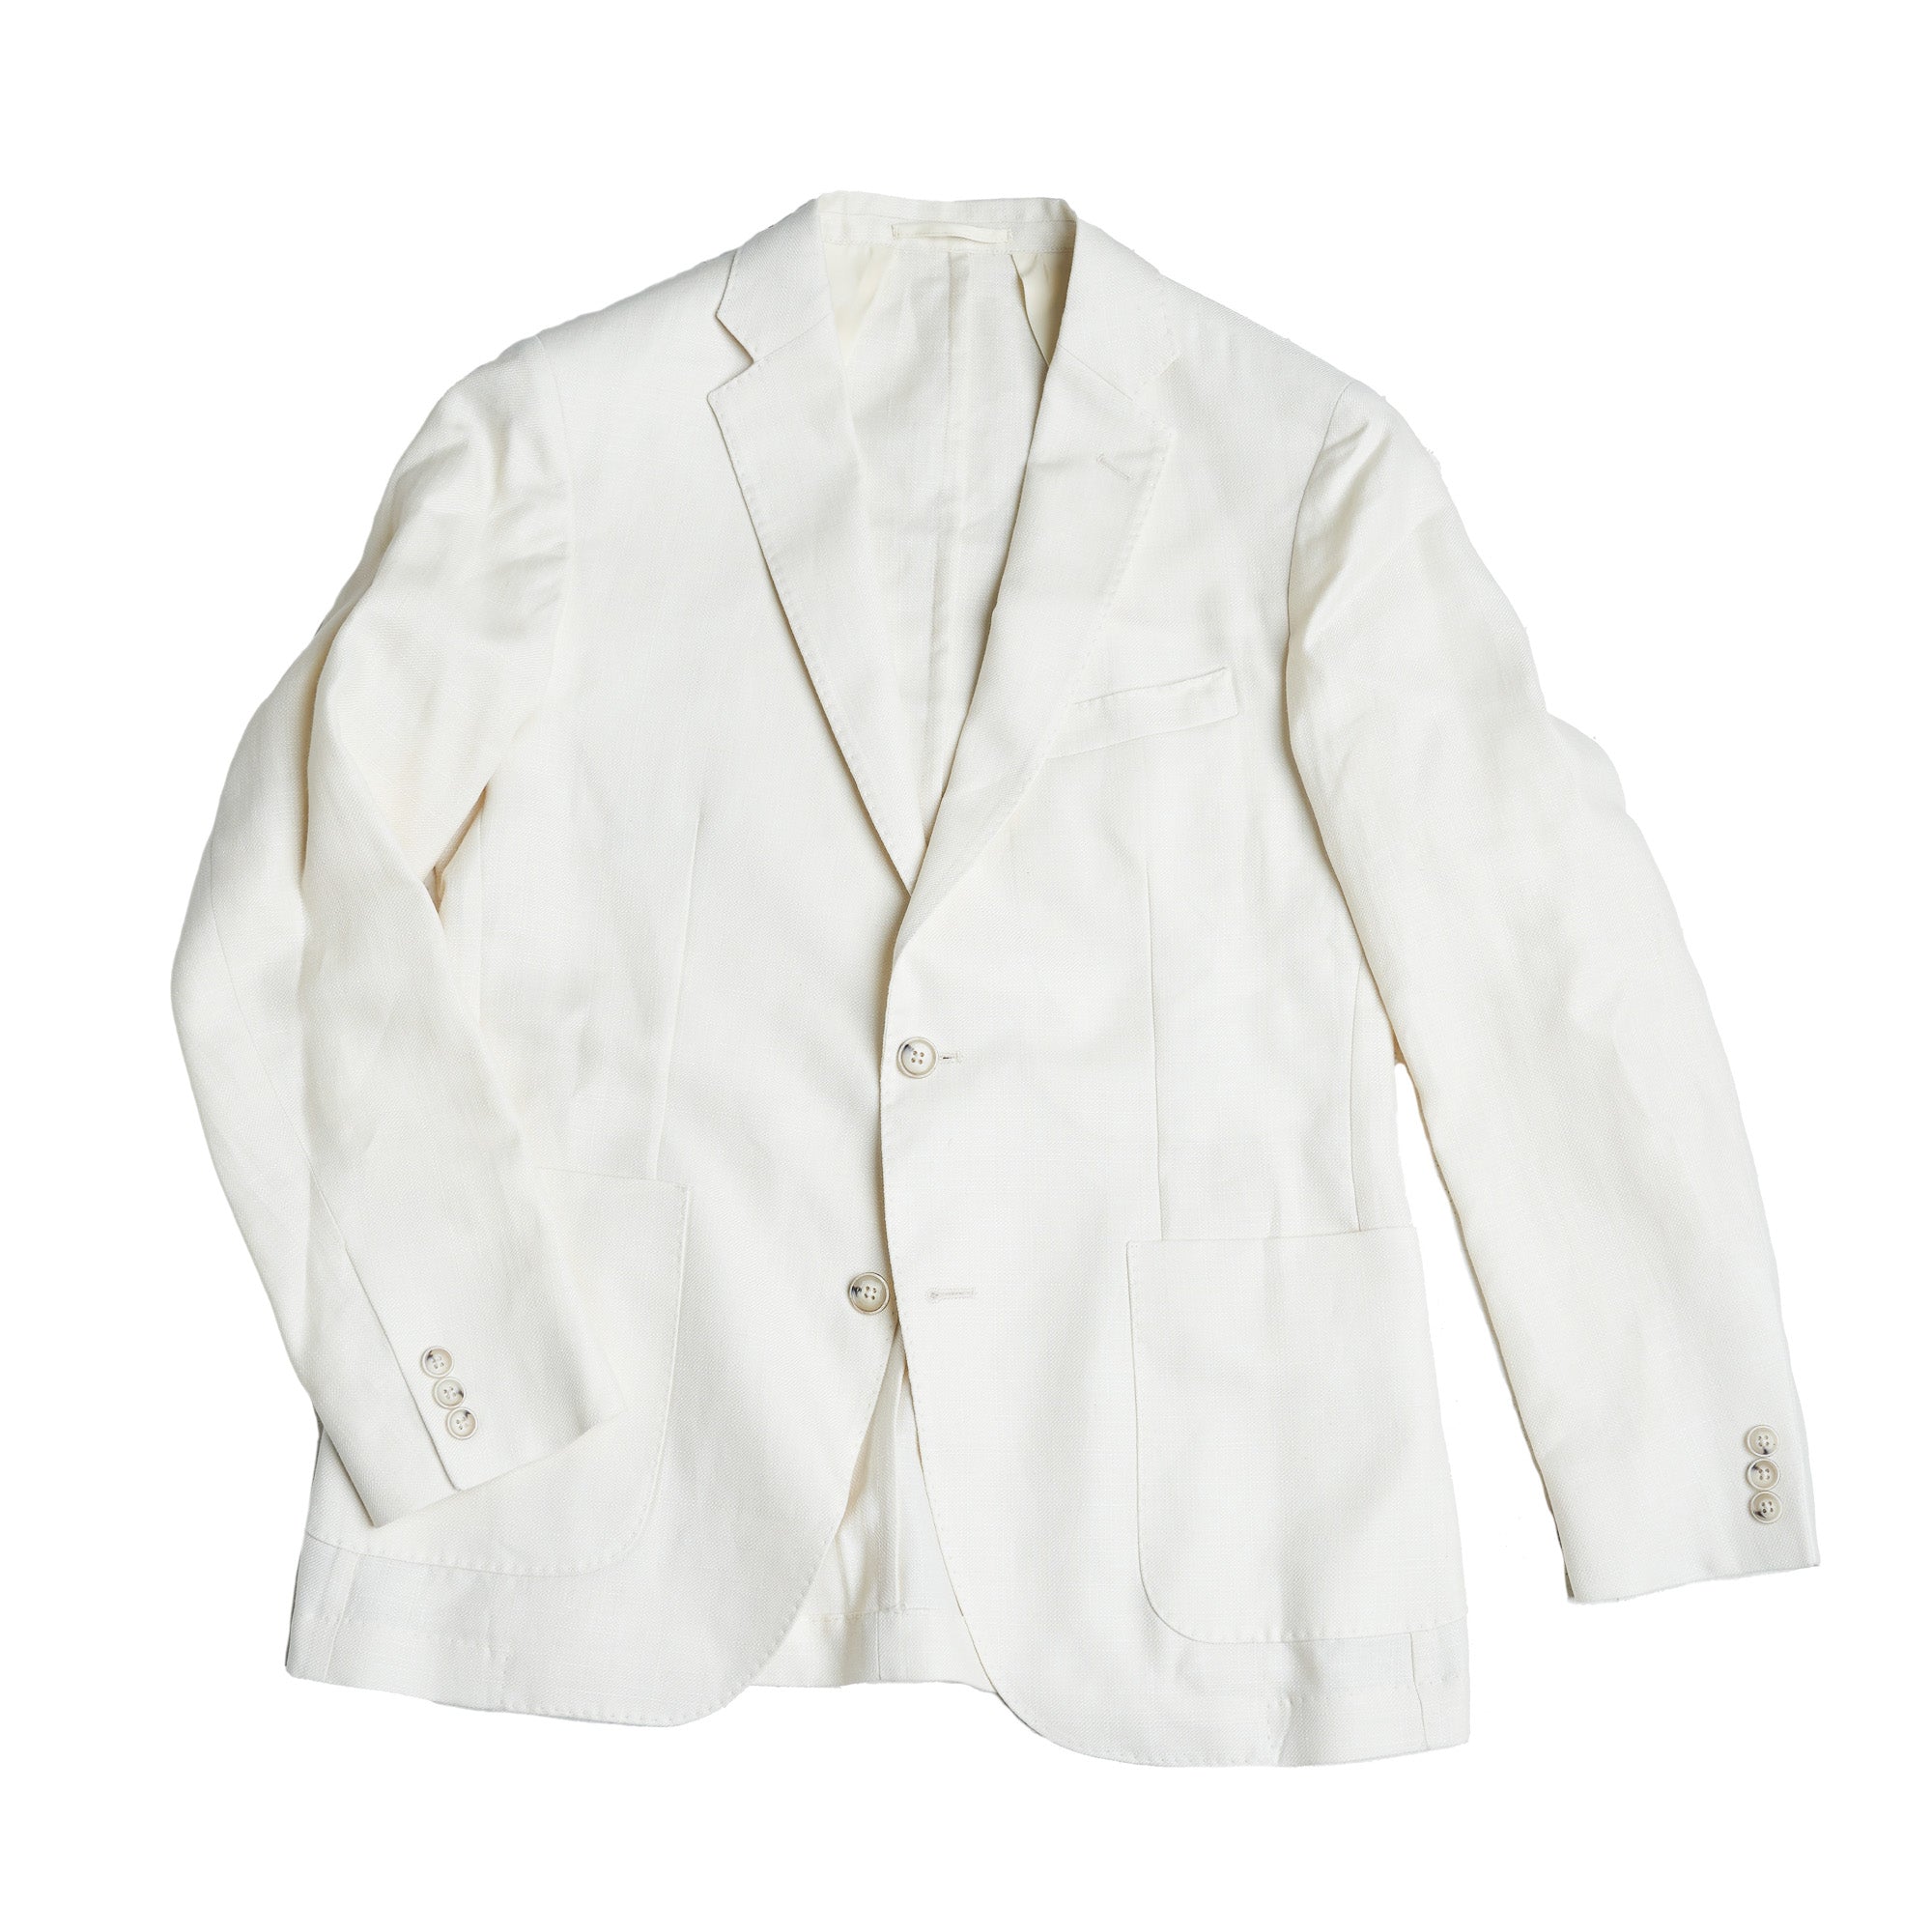 Unstructured Linen Jackets - Stone